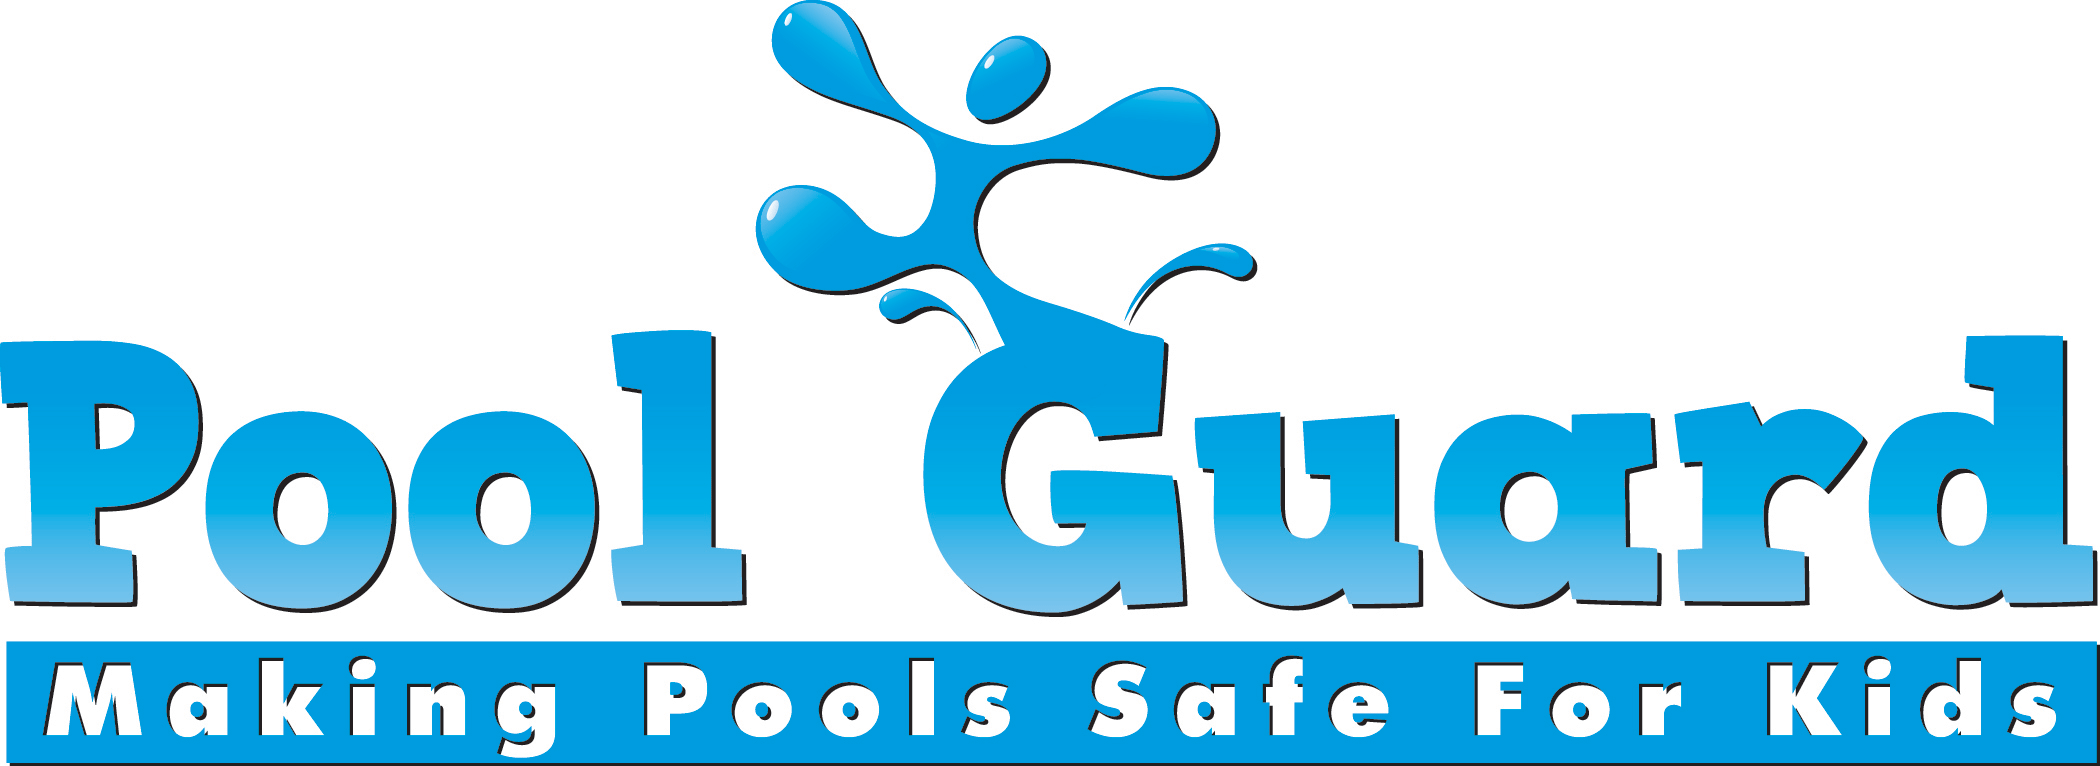 Pool Guard of the Gulf Coast Pensacola, FL Making Pools safe for Kids